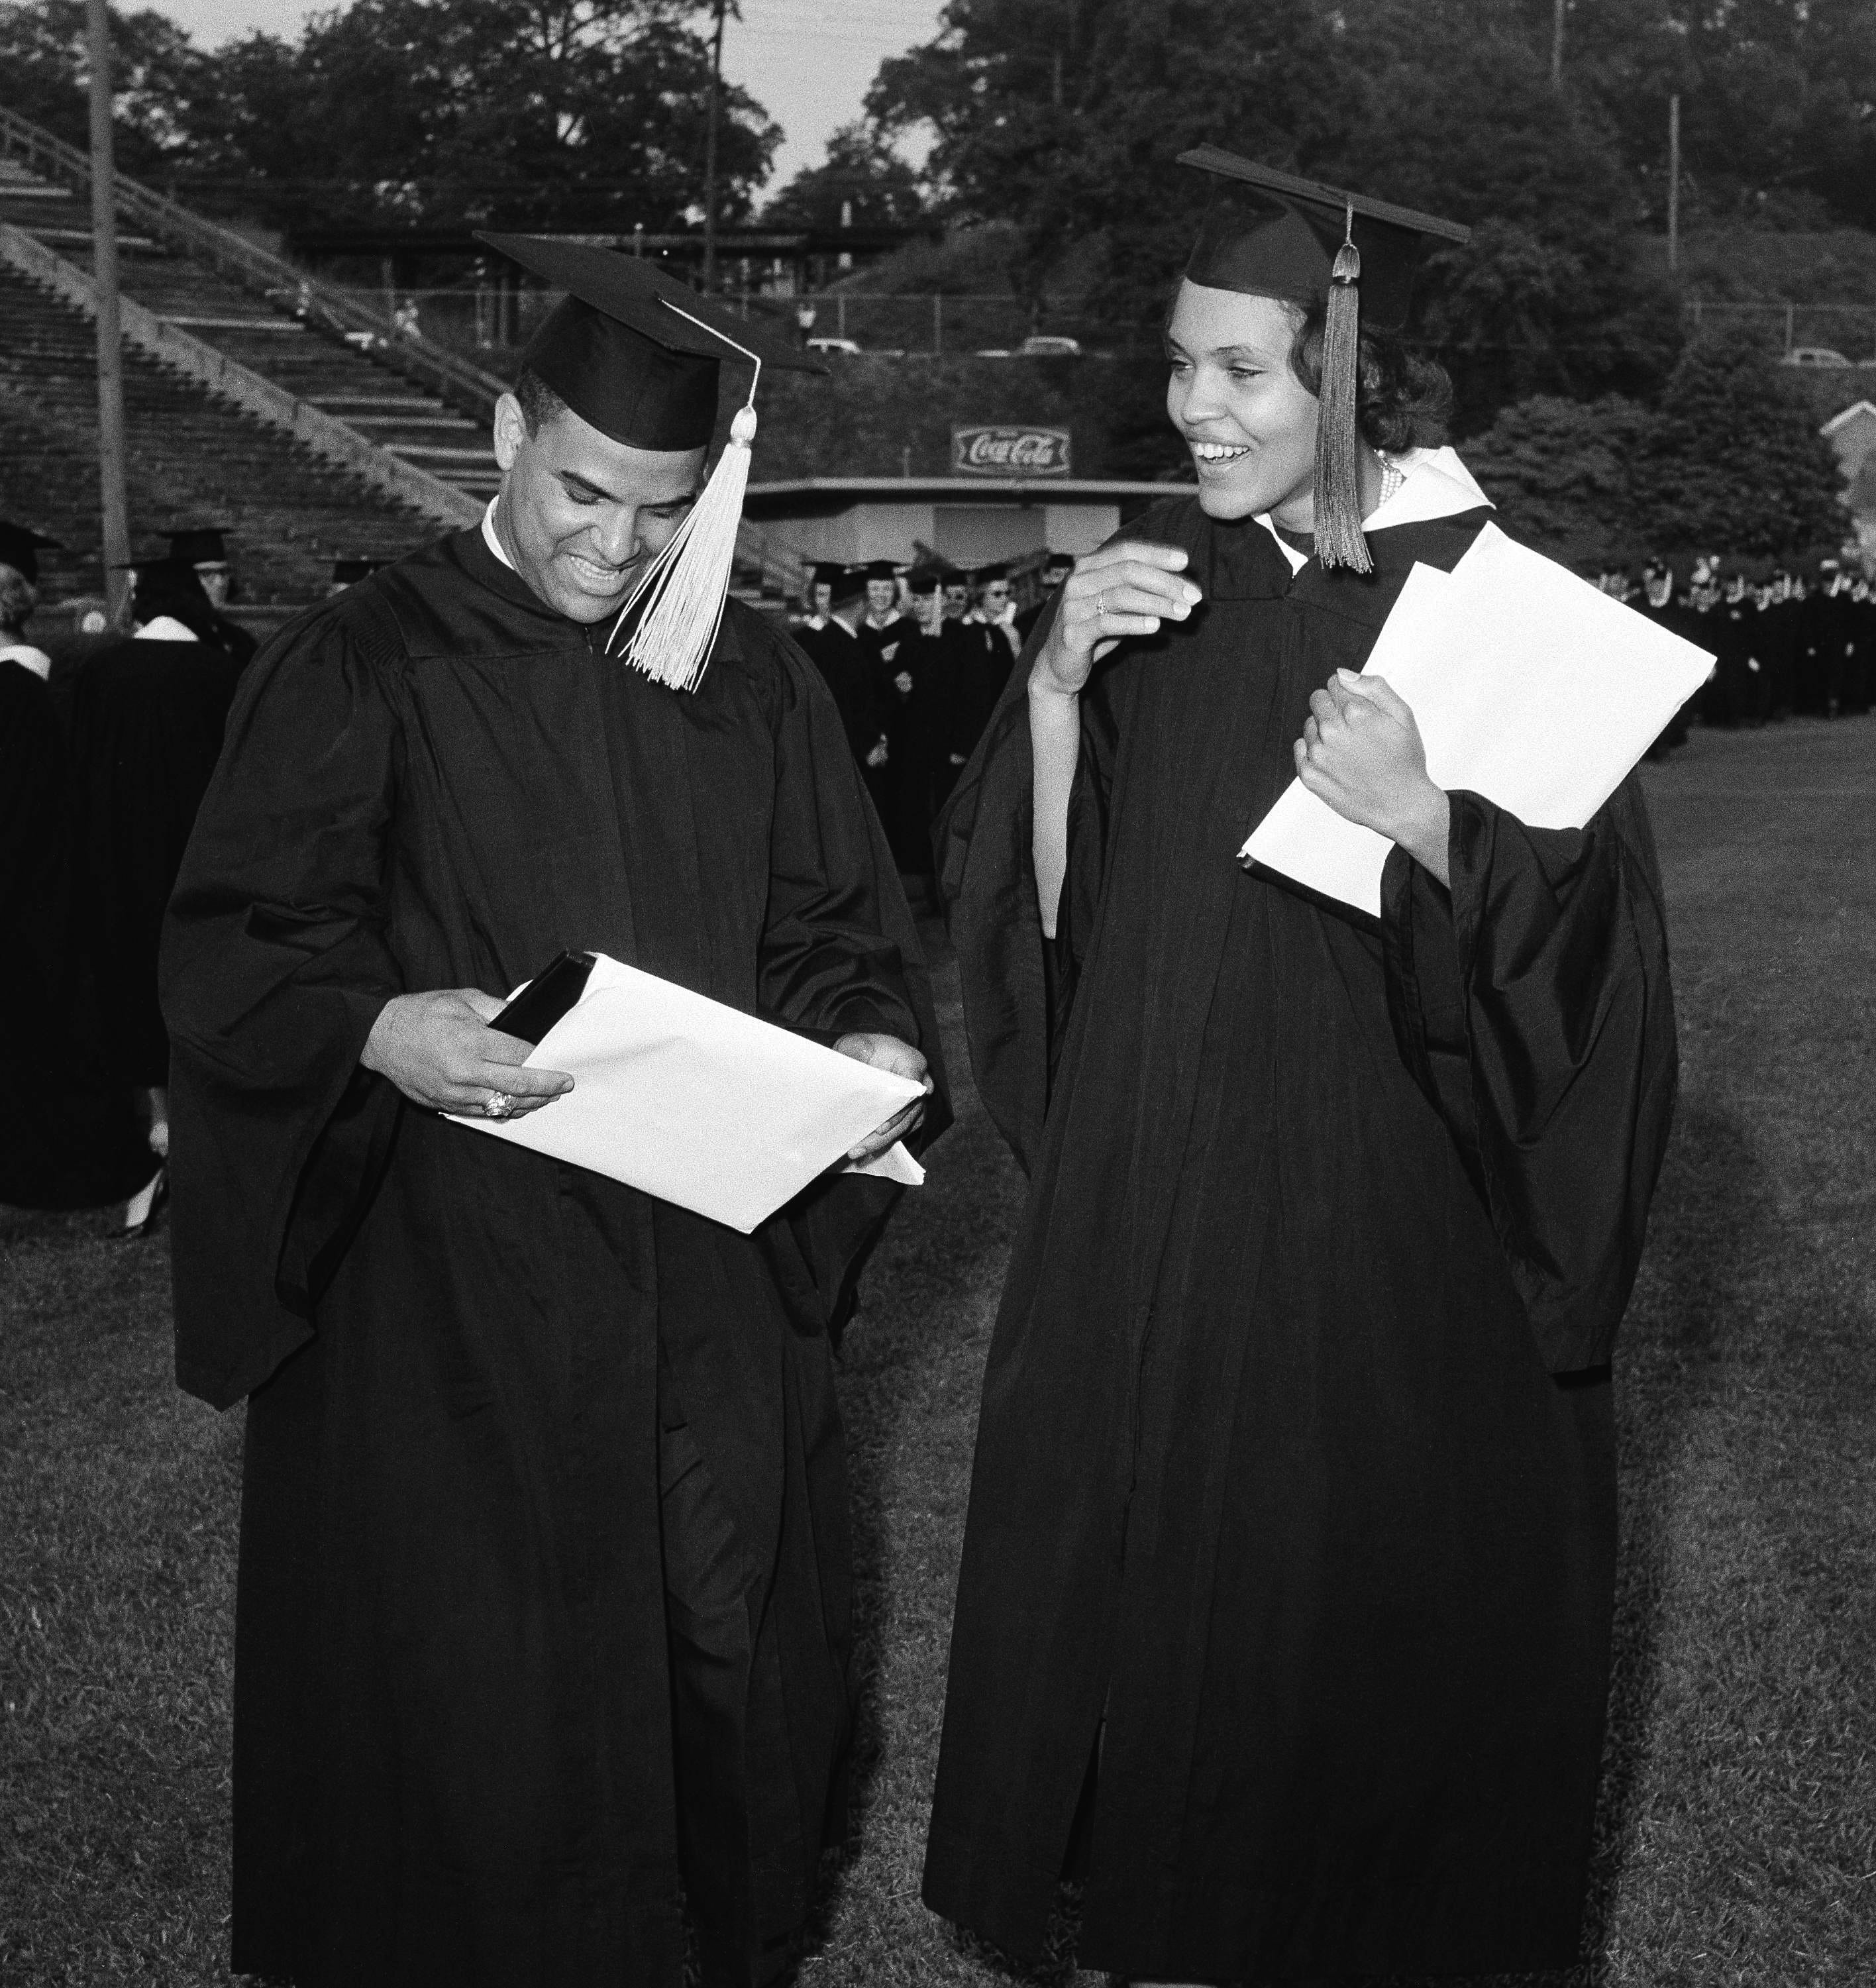 Hamilton Holmes and Charlayne Hunter of Atlanta examine diplomas awarded during the University of Georgia's 160th commencement in Athens, Georgia, June 3, 1963. They were the first Black students to attend the nation's oldest land grant college.